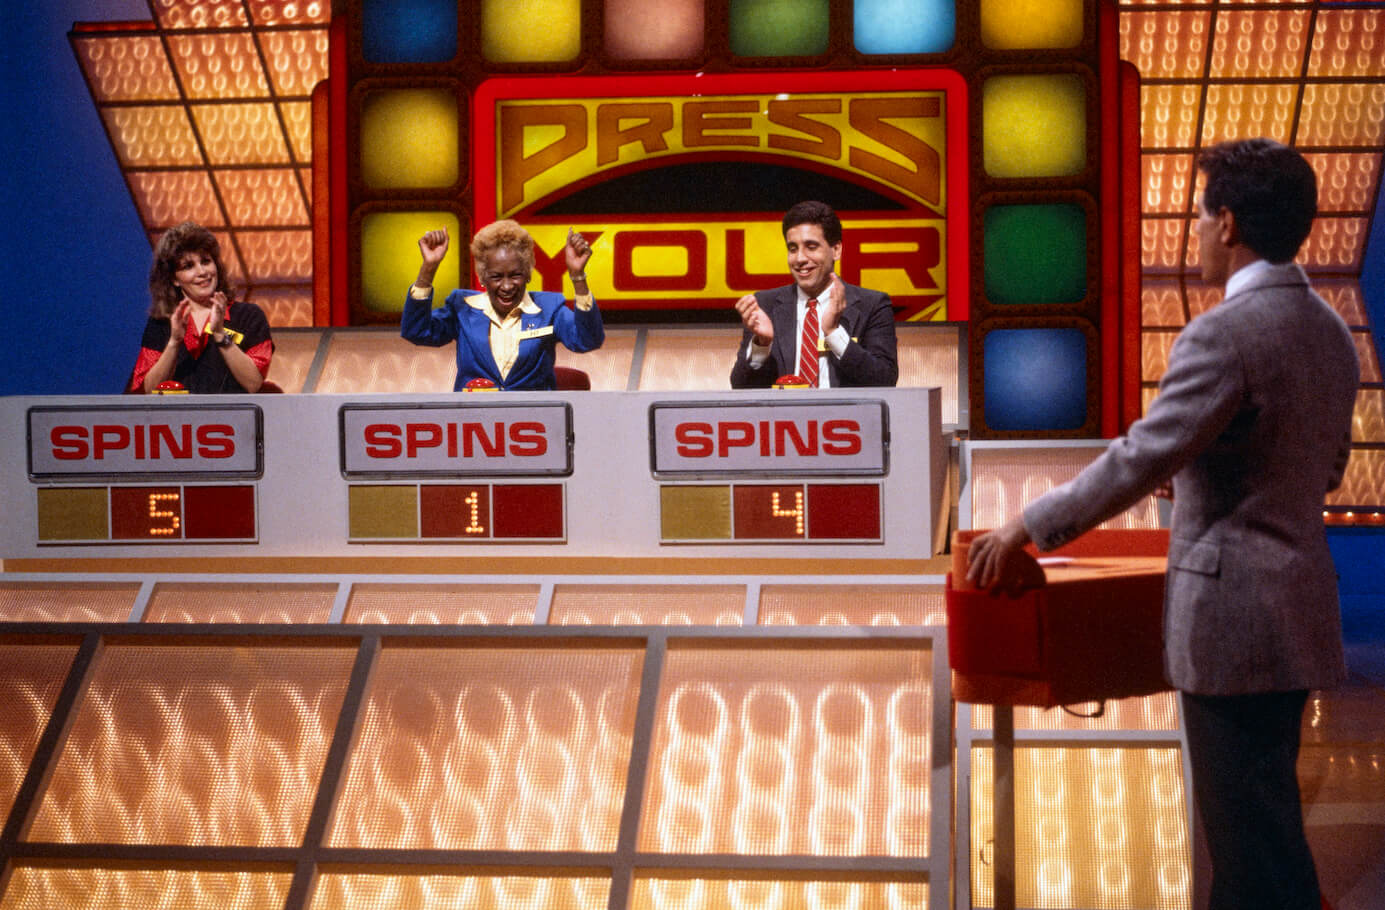 Three contestants on 'Press Your Luck' with Peter Tomarken talking to them as host